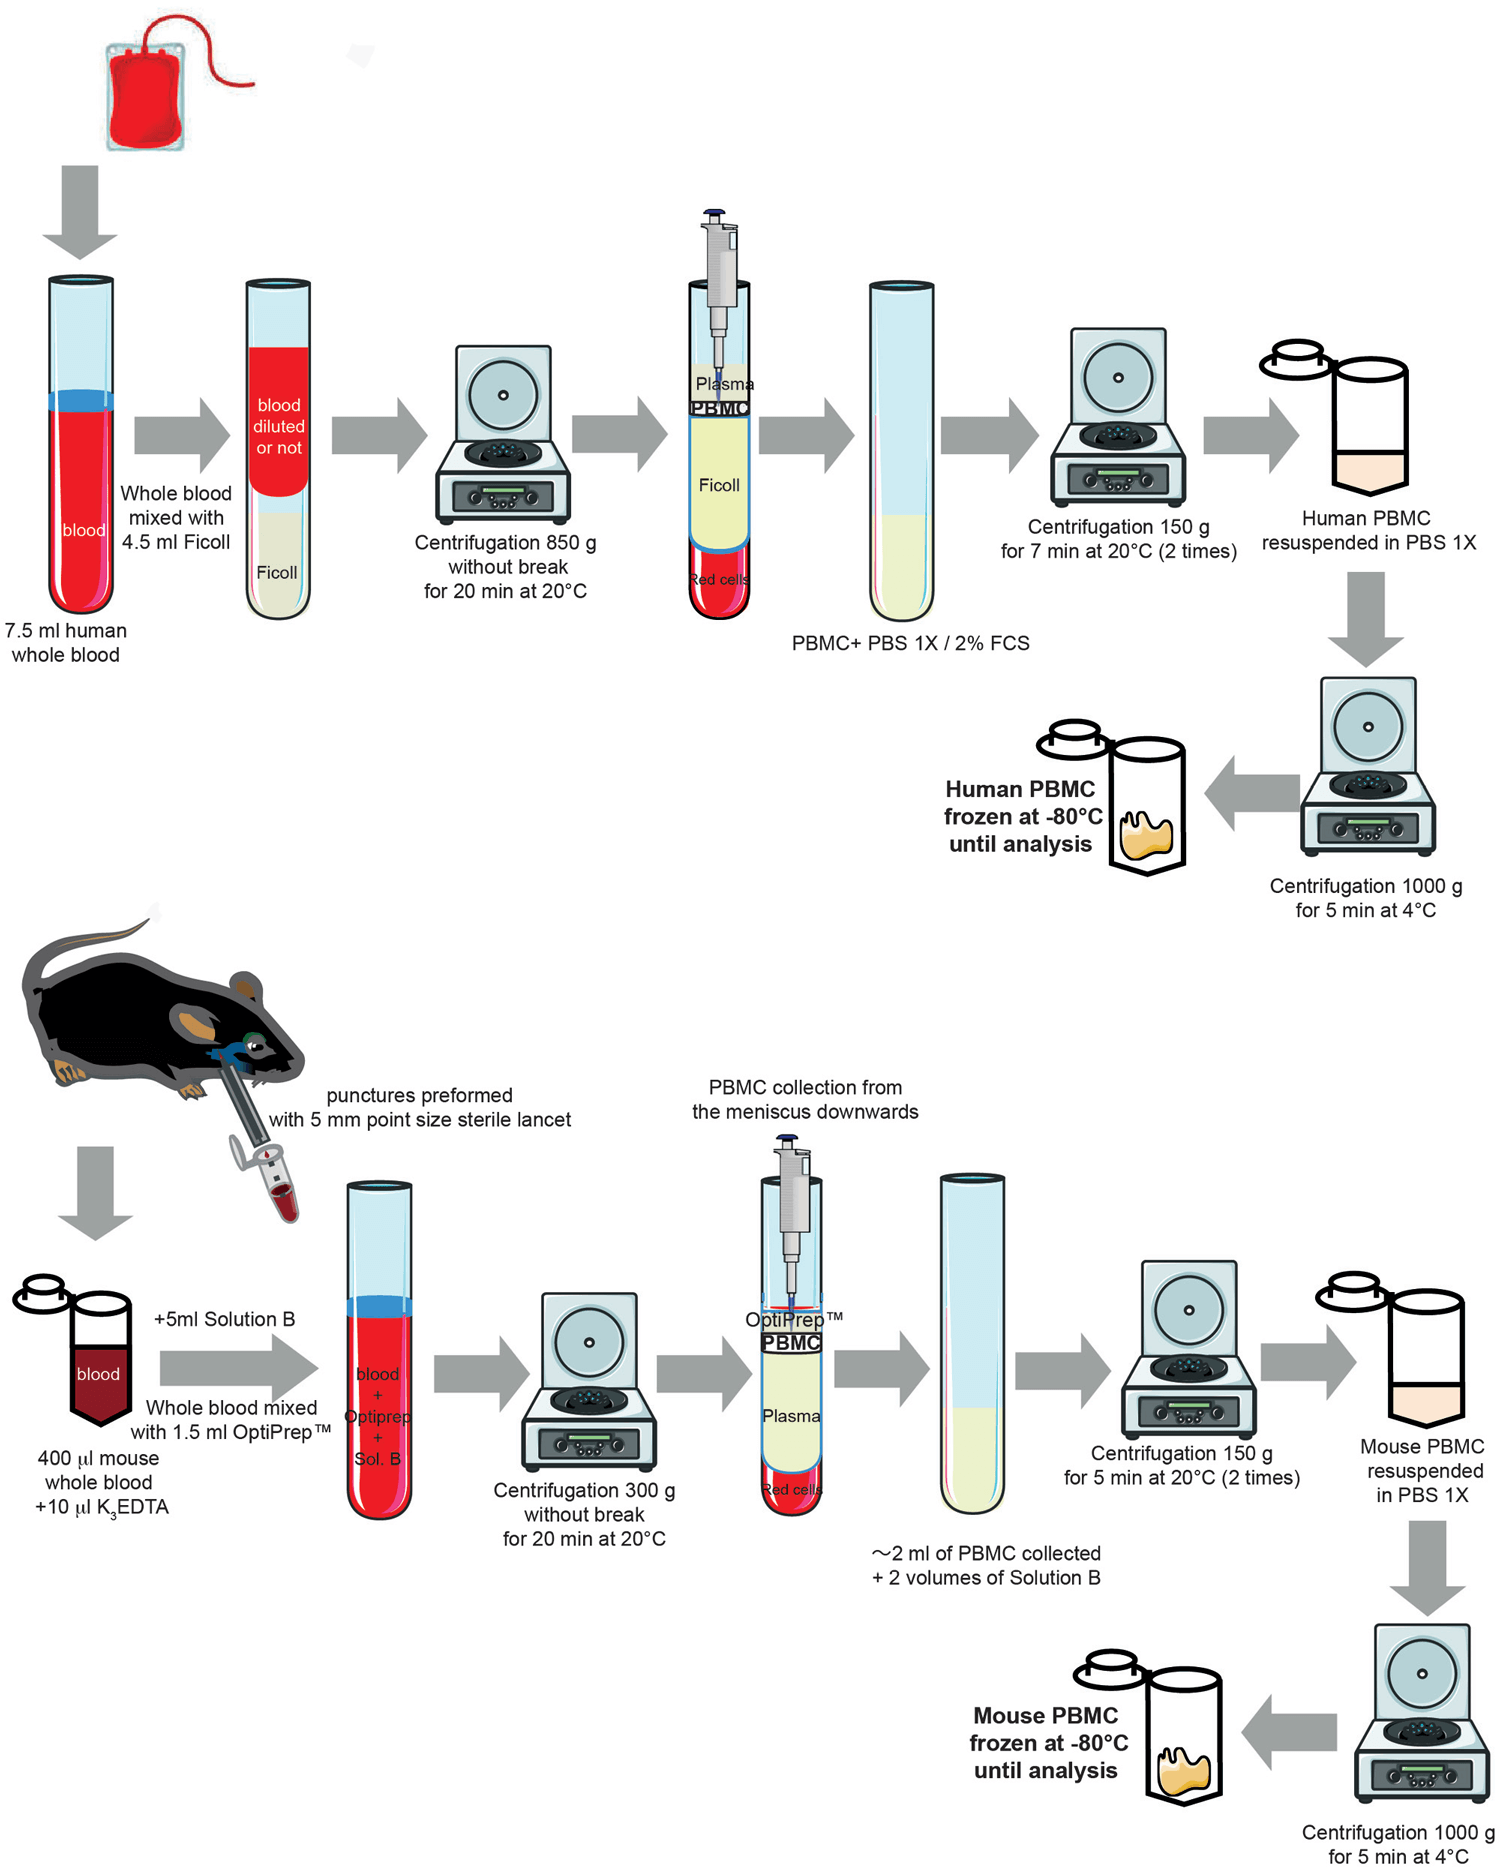 Experimental protocol for isolating human and mouse peripheral blood mononuclear cells from whole blood.